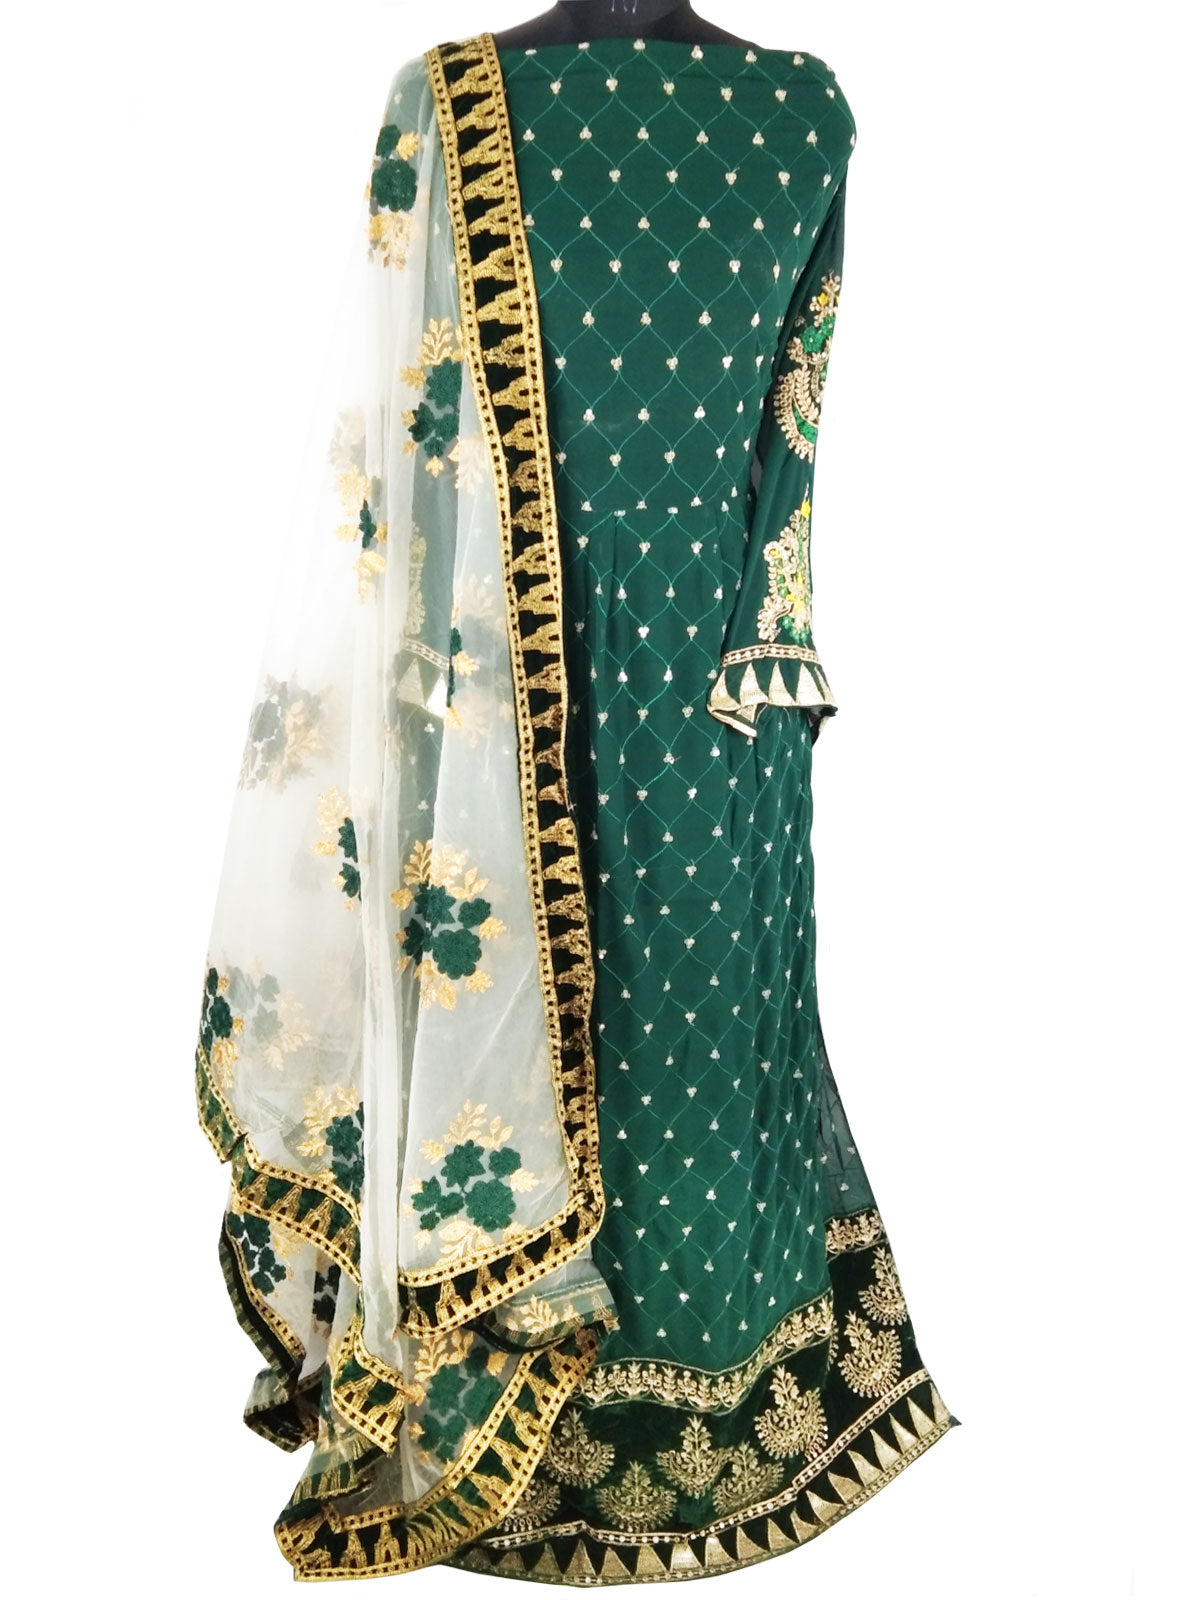 Green & White Embroidered Floral, Georgette Anarkali Gown (Semi-Stitched )